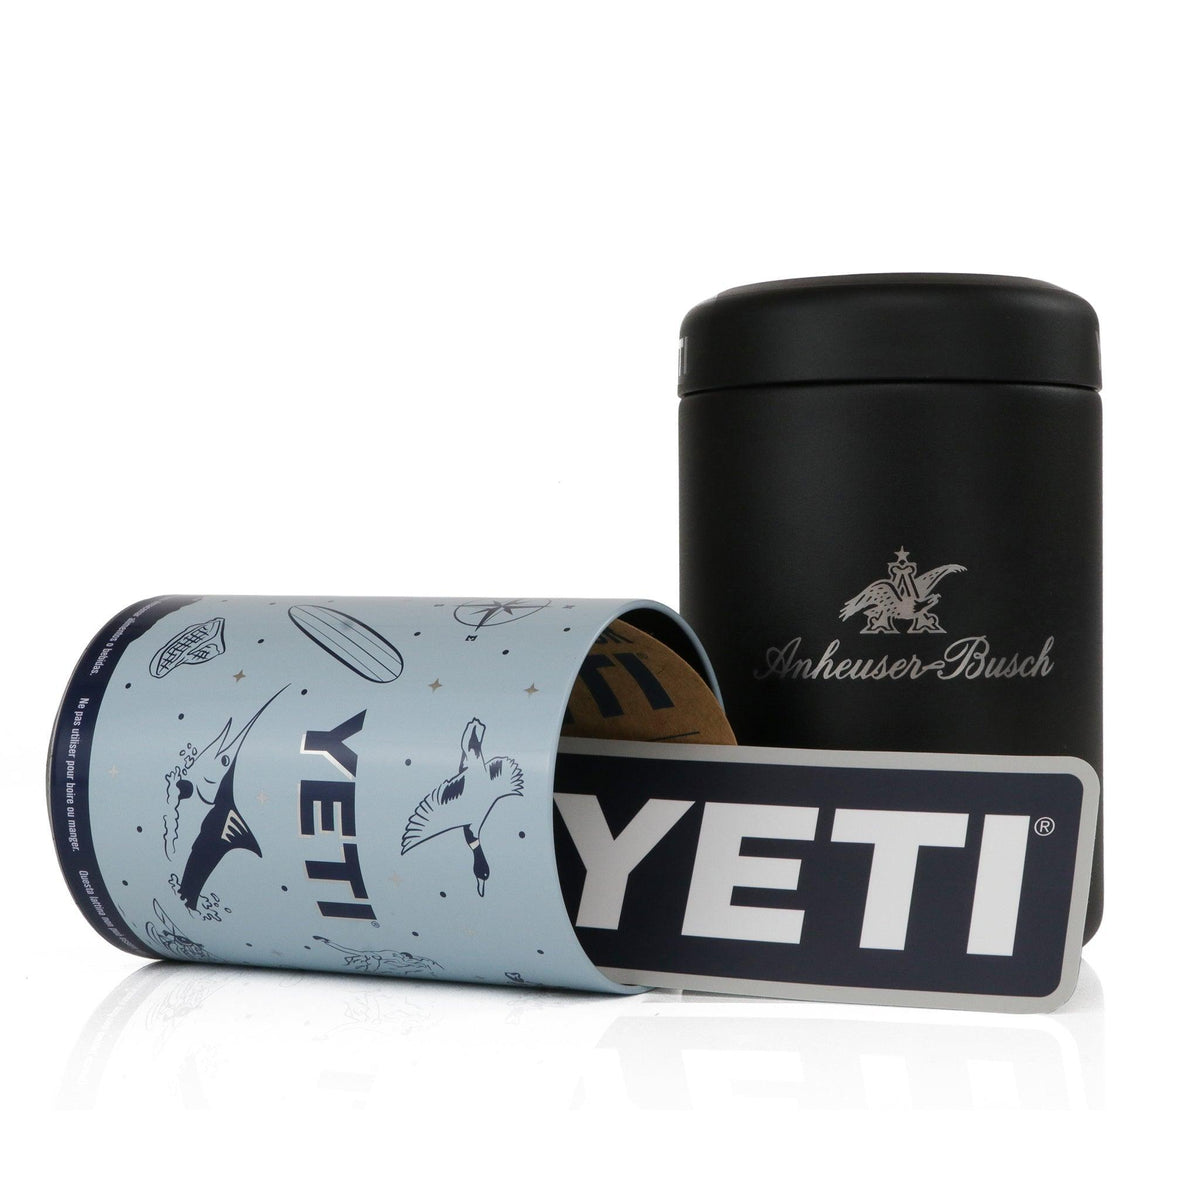 https://www.shopbeergears.shop/wp-content/uploads/1692/92/shop-online-at-a-eagle-yeti-12oz-can-colster-anheuser-busch-com_2.jpg